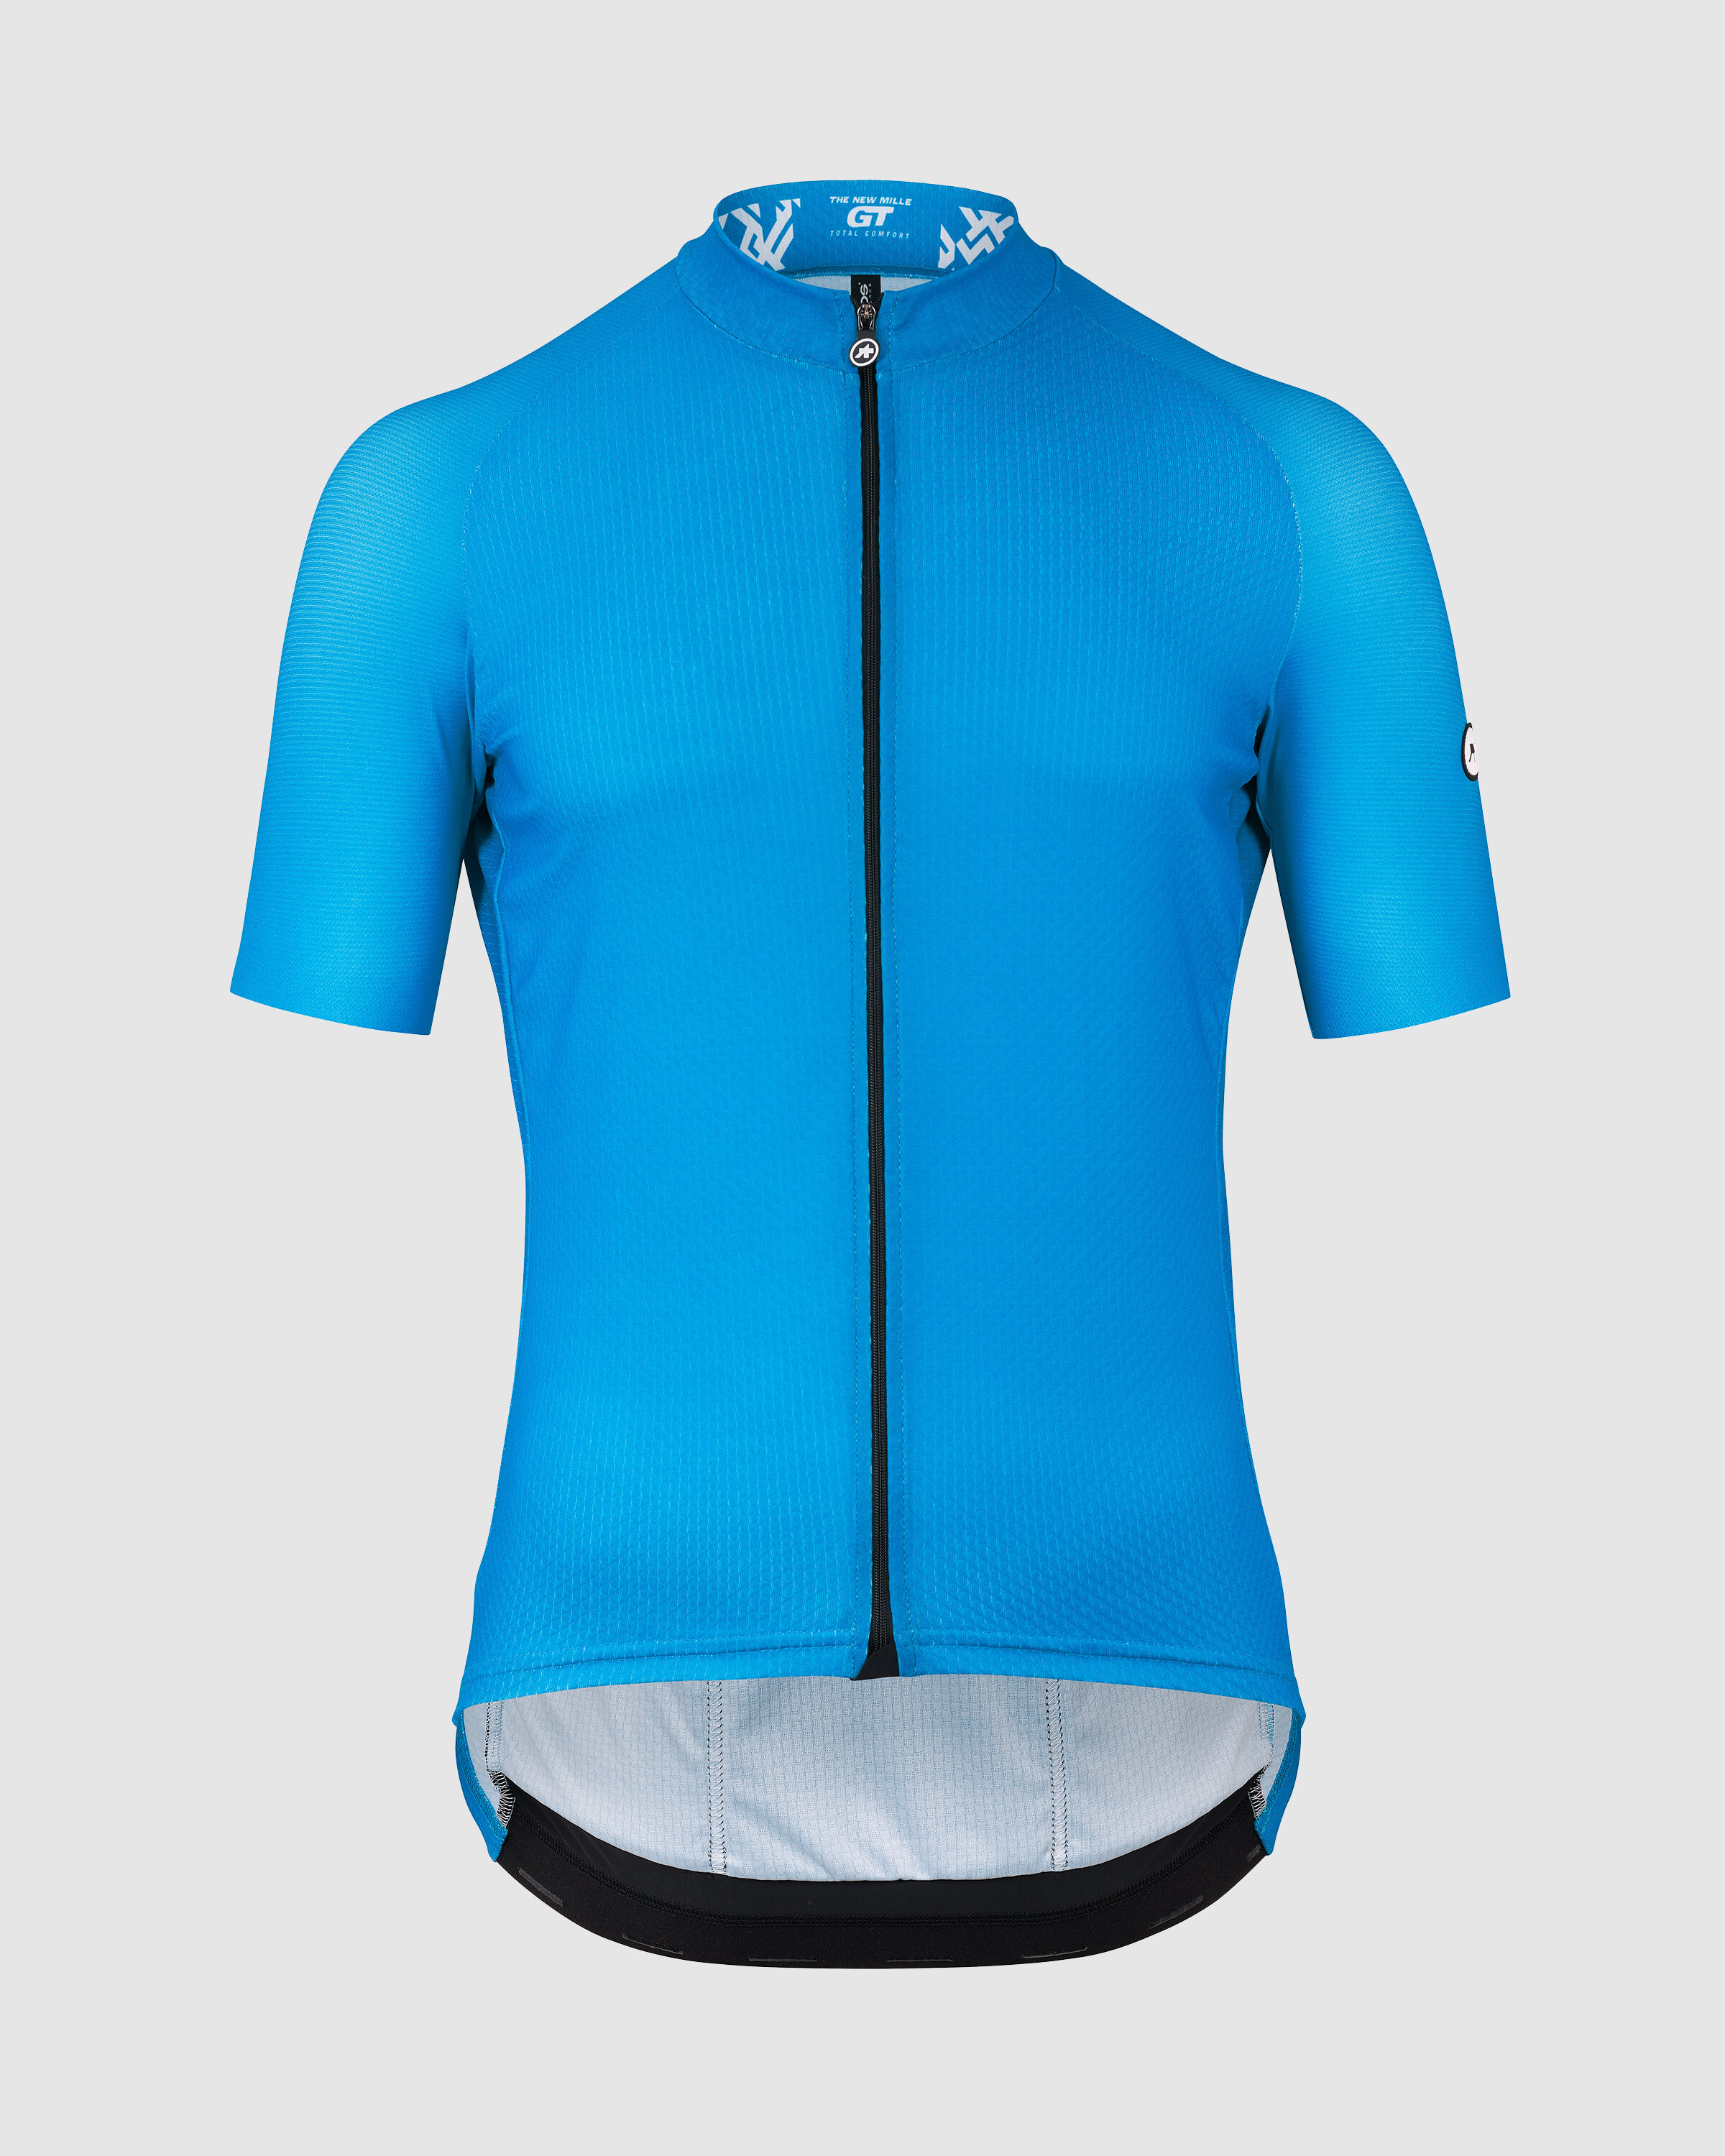 MILLE GT Jersey C2 - ASSOS Of Switzerland - Official Outlet